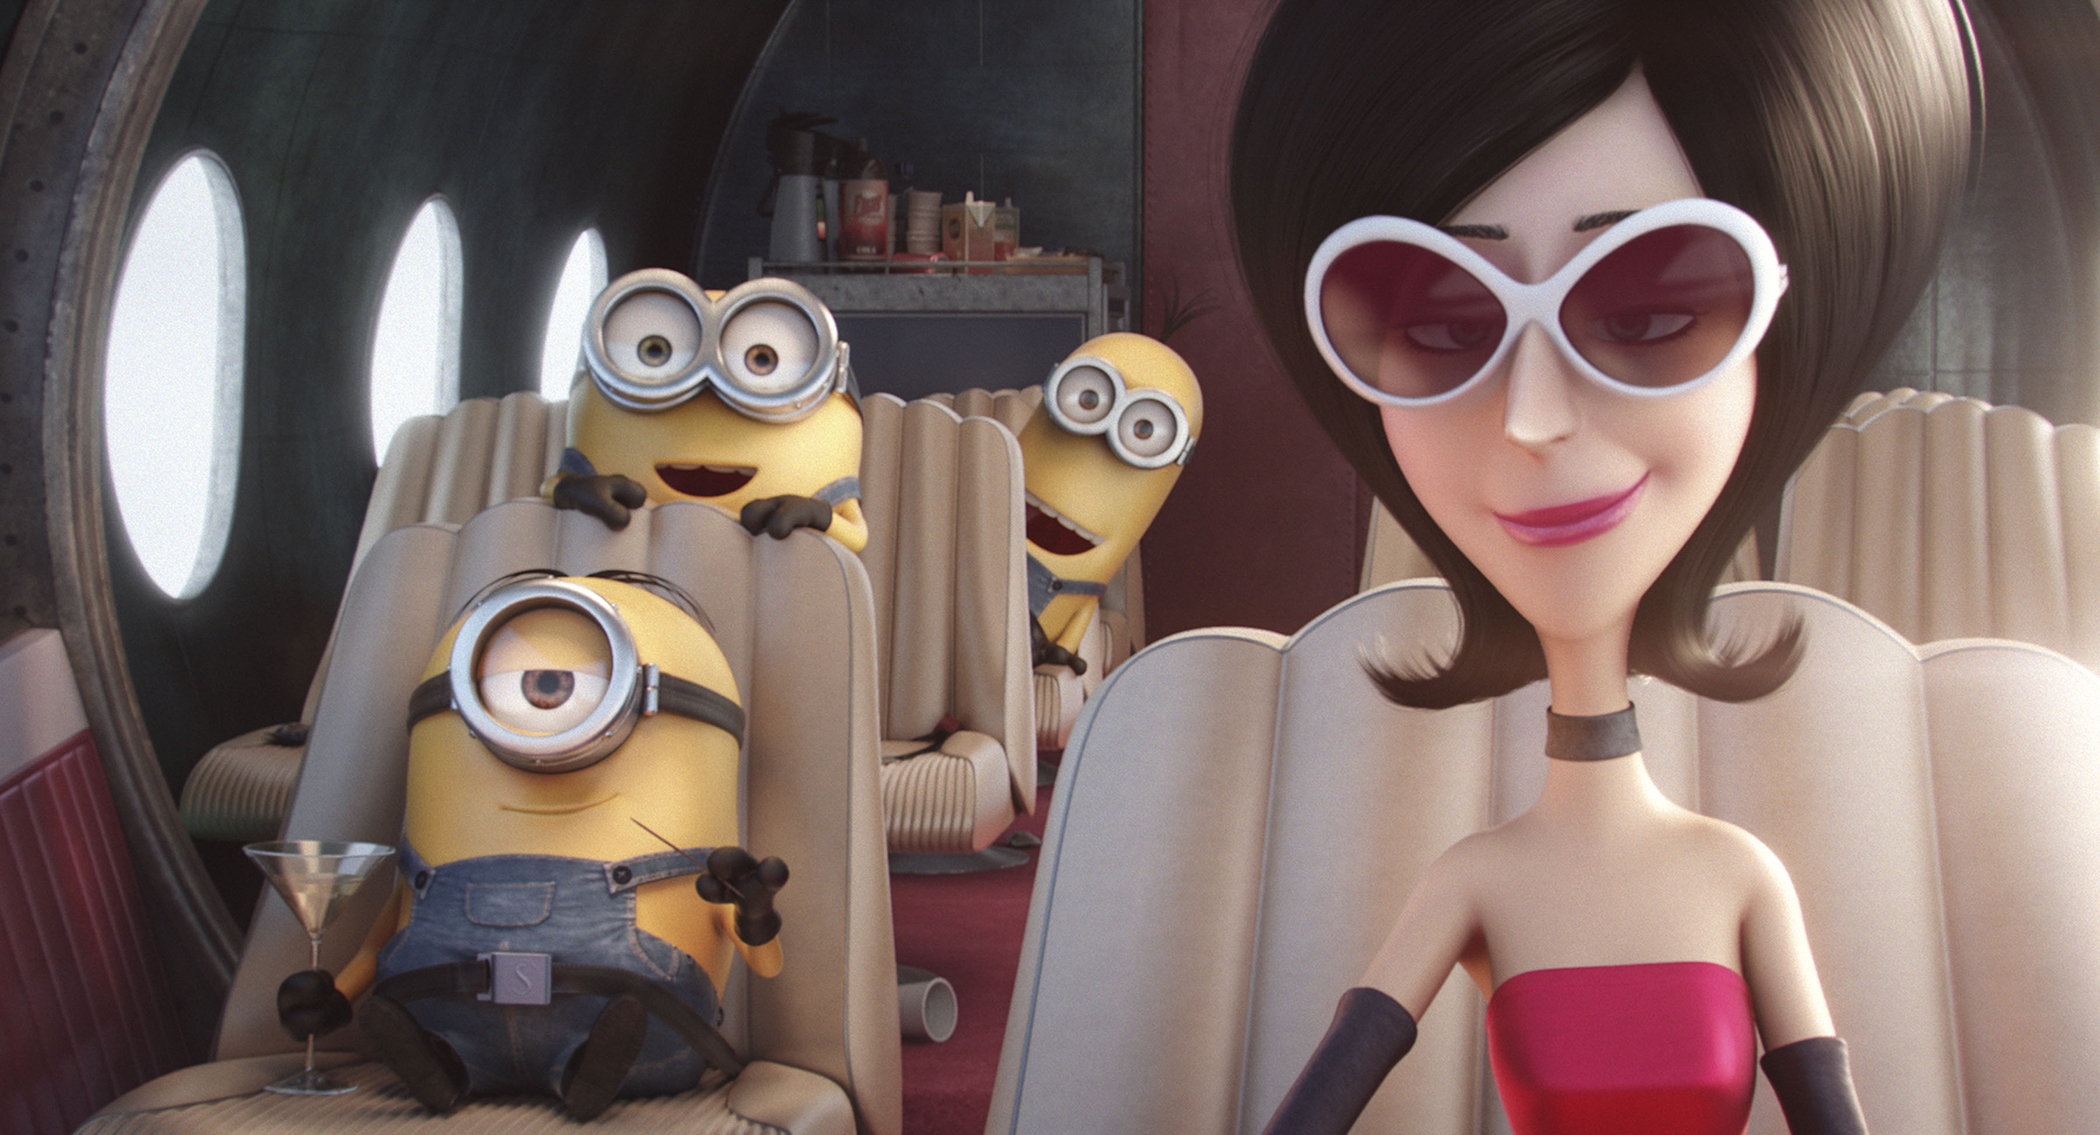 This Week's Best Deals: Free 'Minions' Tickets, Amazing July 4 Sales